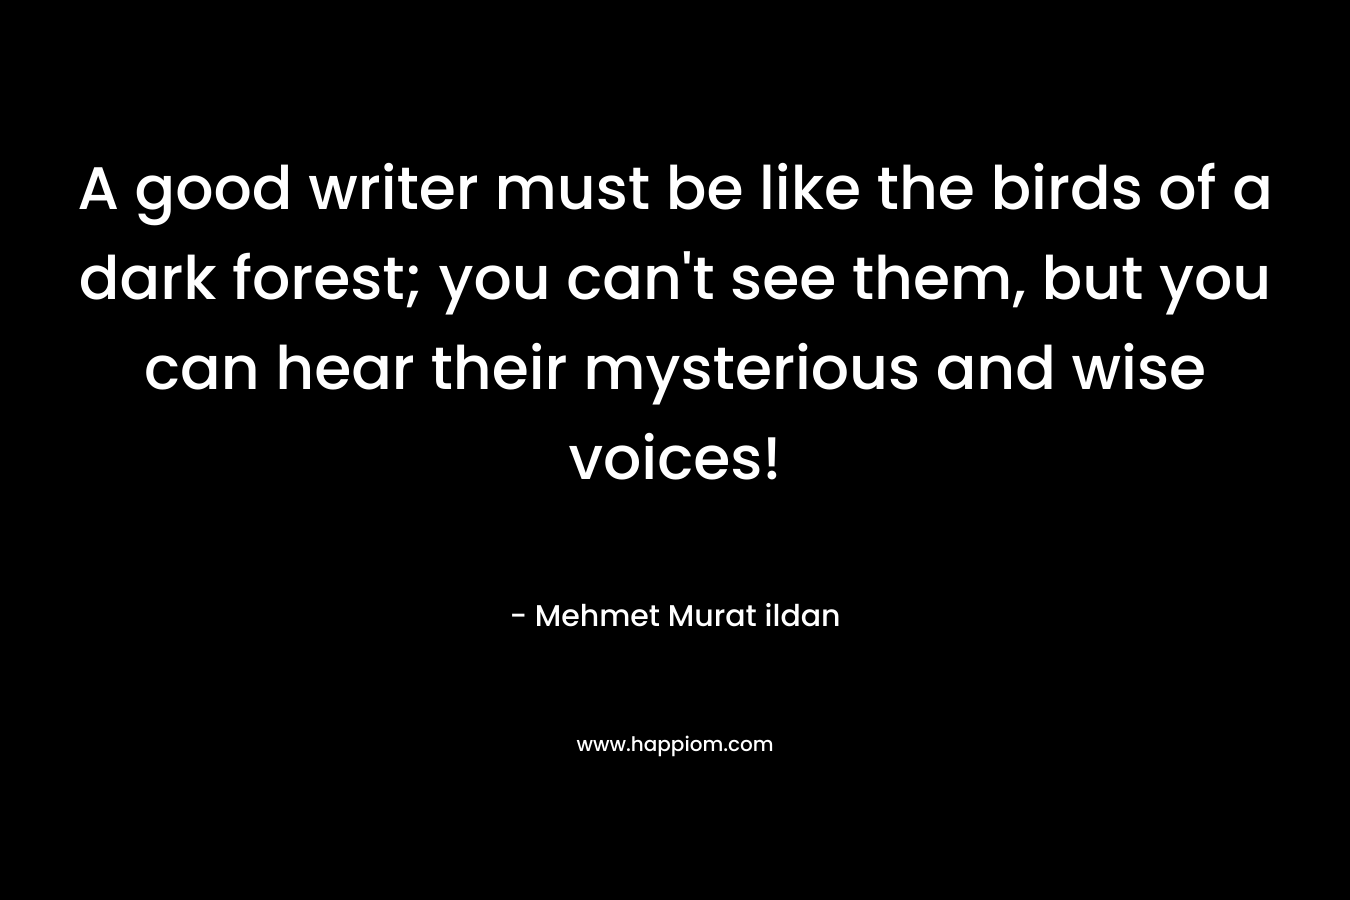 A good writer must be like the birds of a dark forest; you can't see them, but you can hear their mysterious and wise voices!